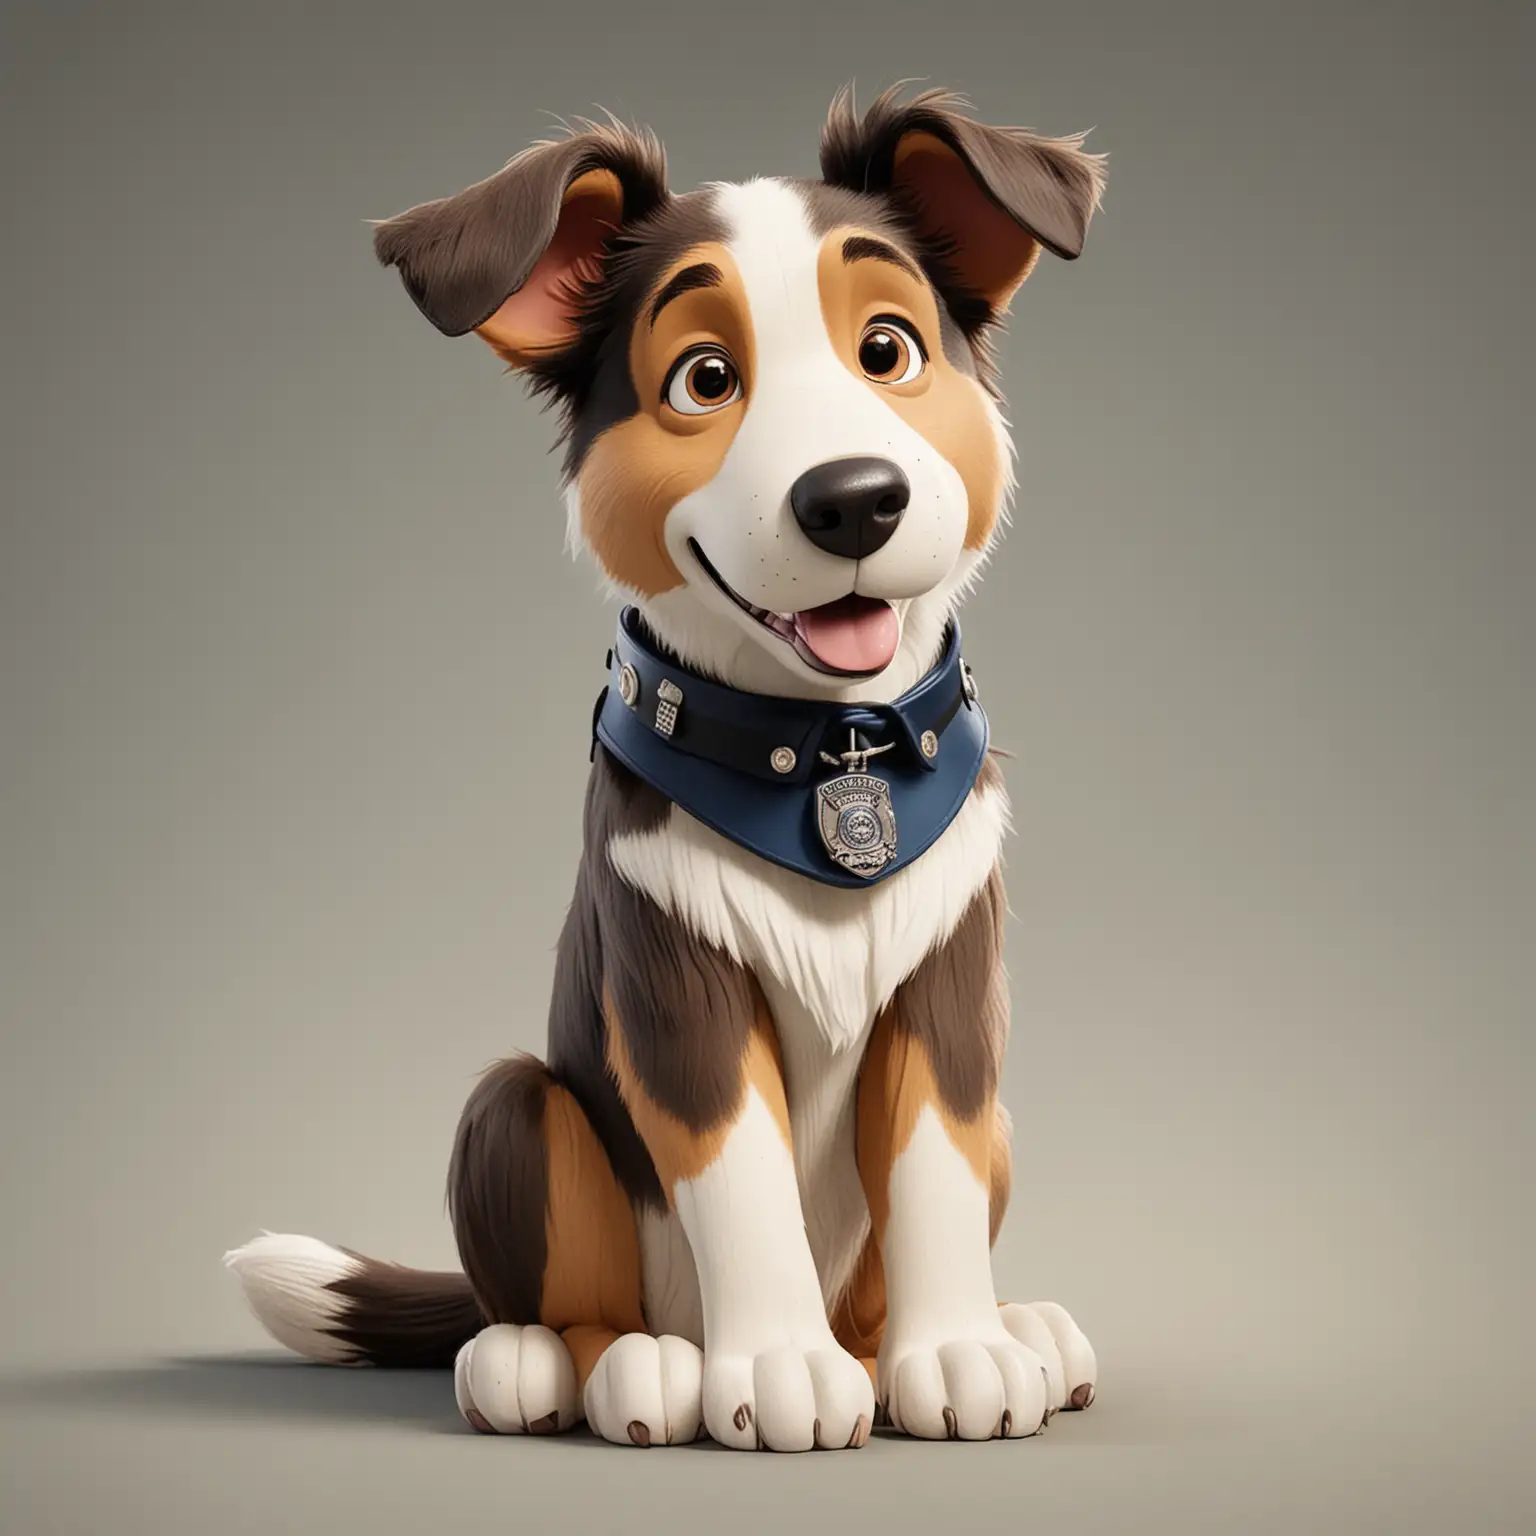 Cartoon-ShortHaired-Collie-Dog-Sitting-Pose-Parody-of-Police-Puppy